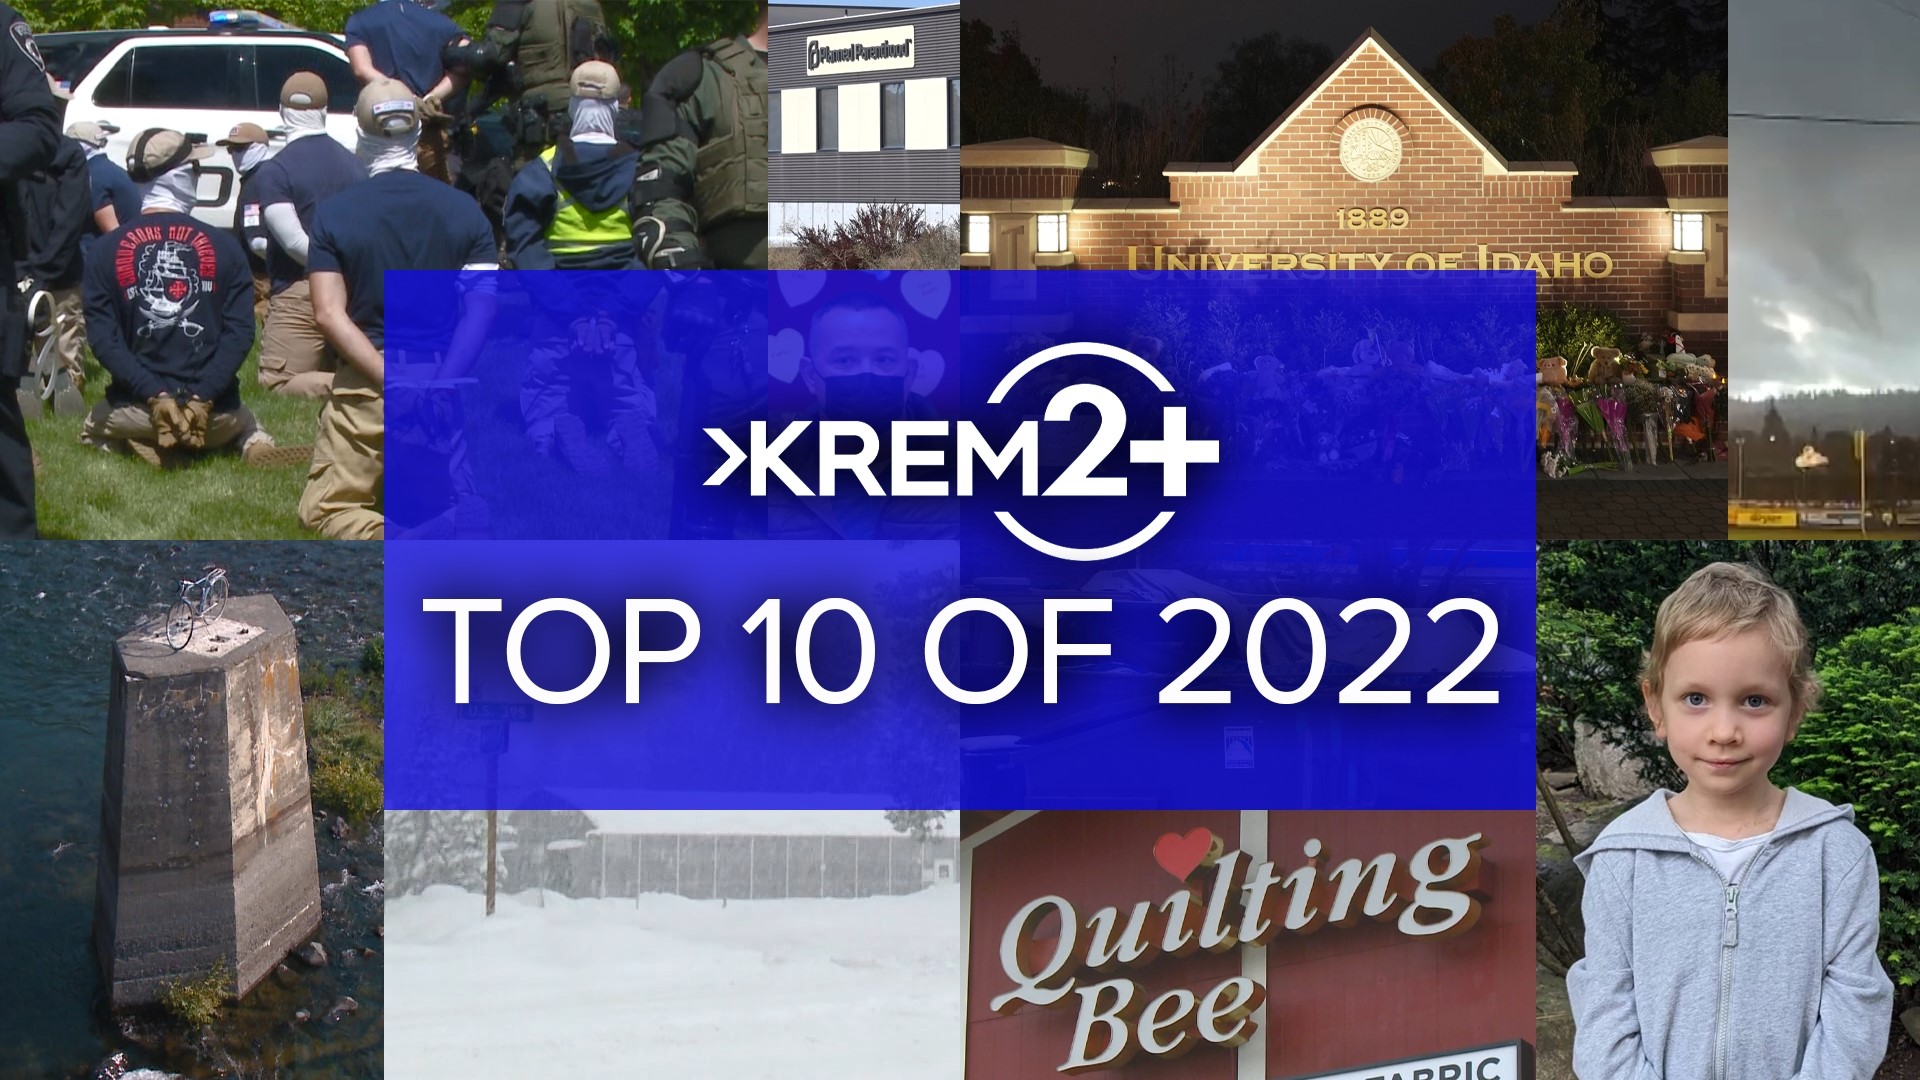 Join KREM 2 News as we countdown the Top 10 stories in Spokane and the Inland Northwest for 2022.